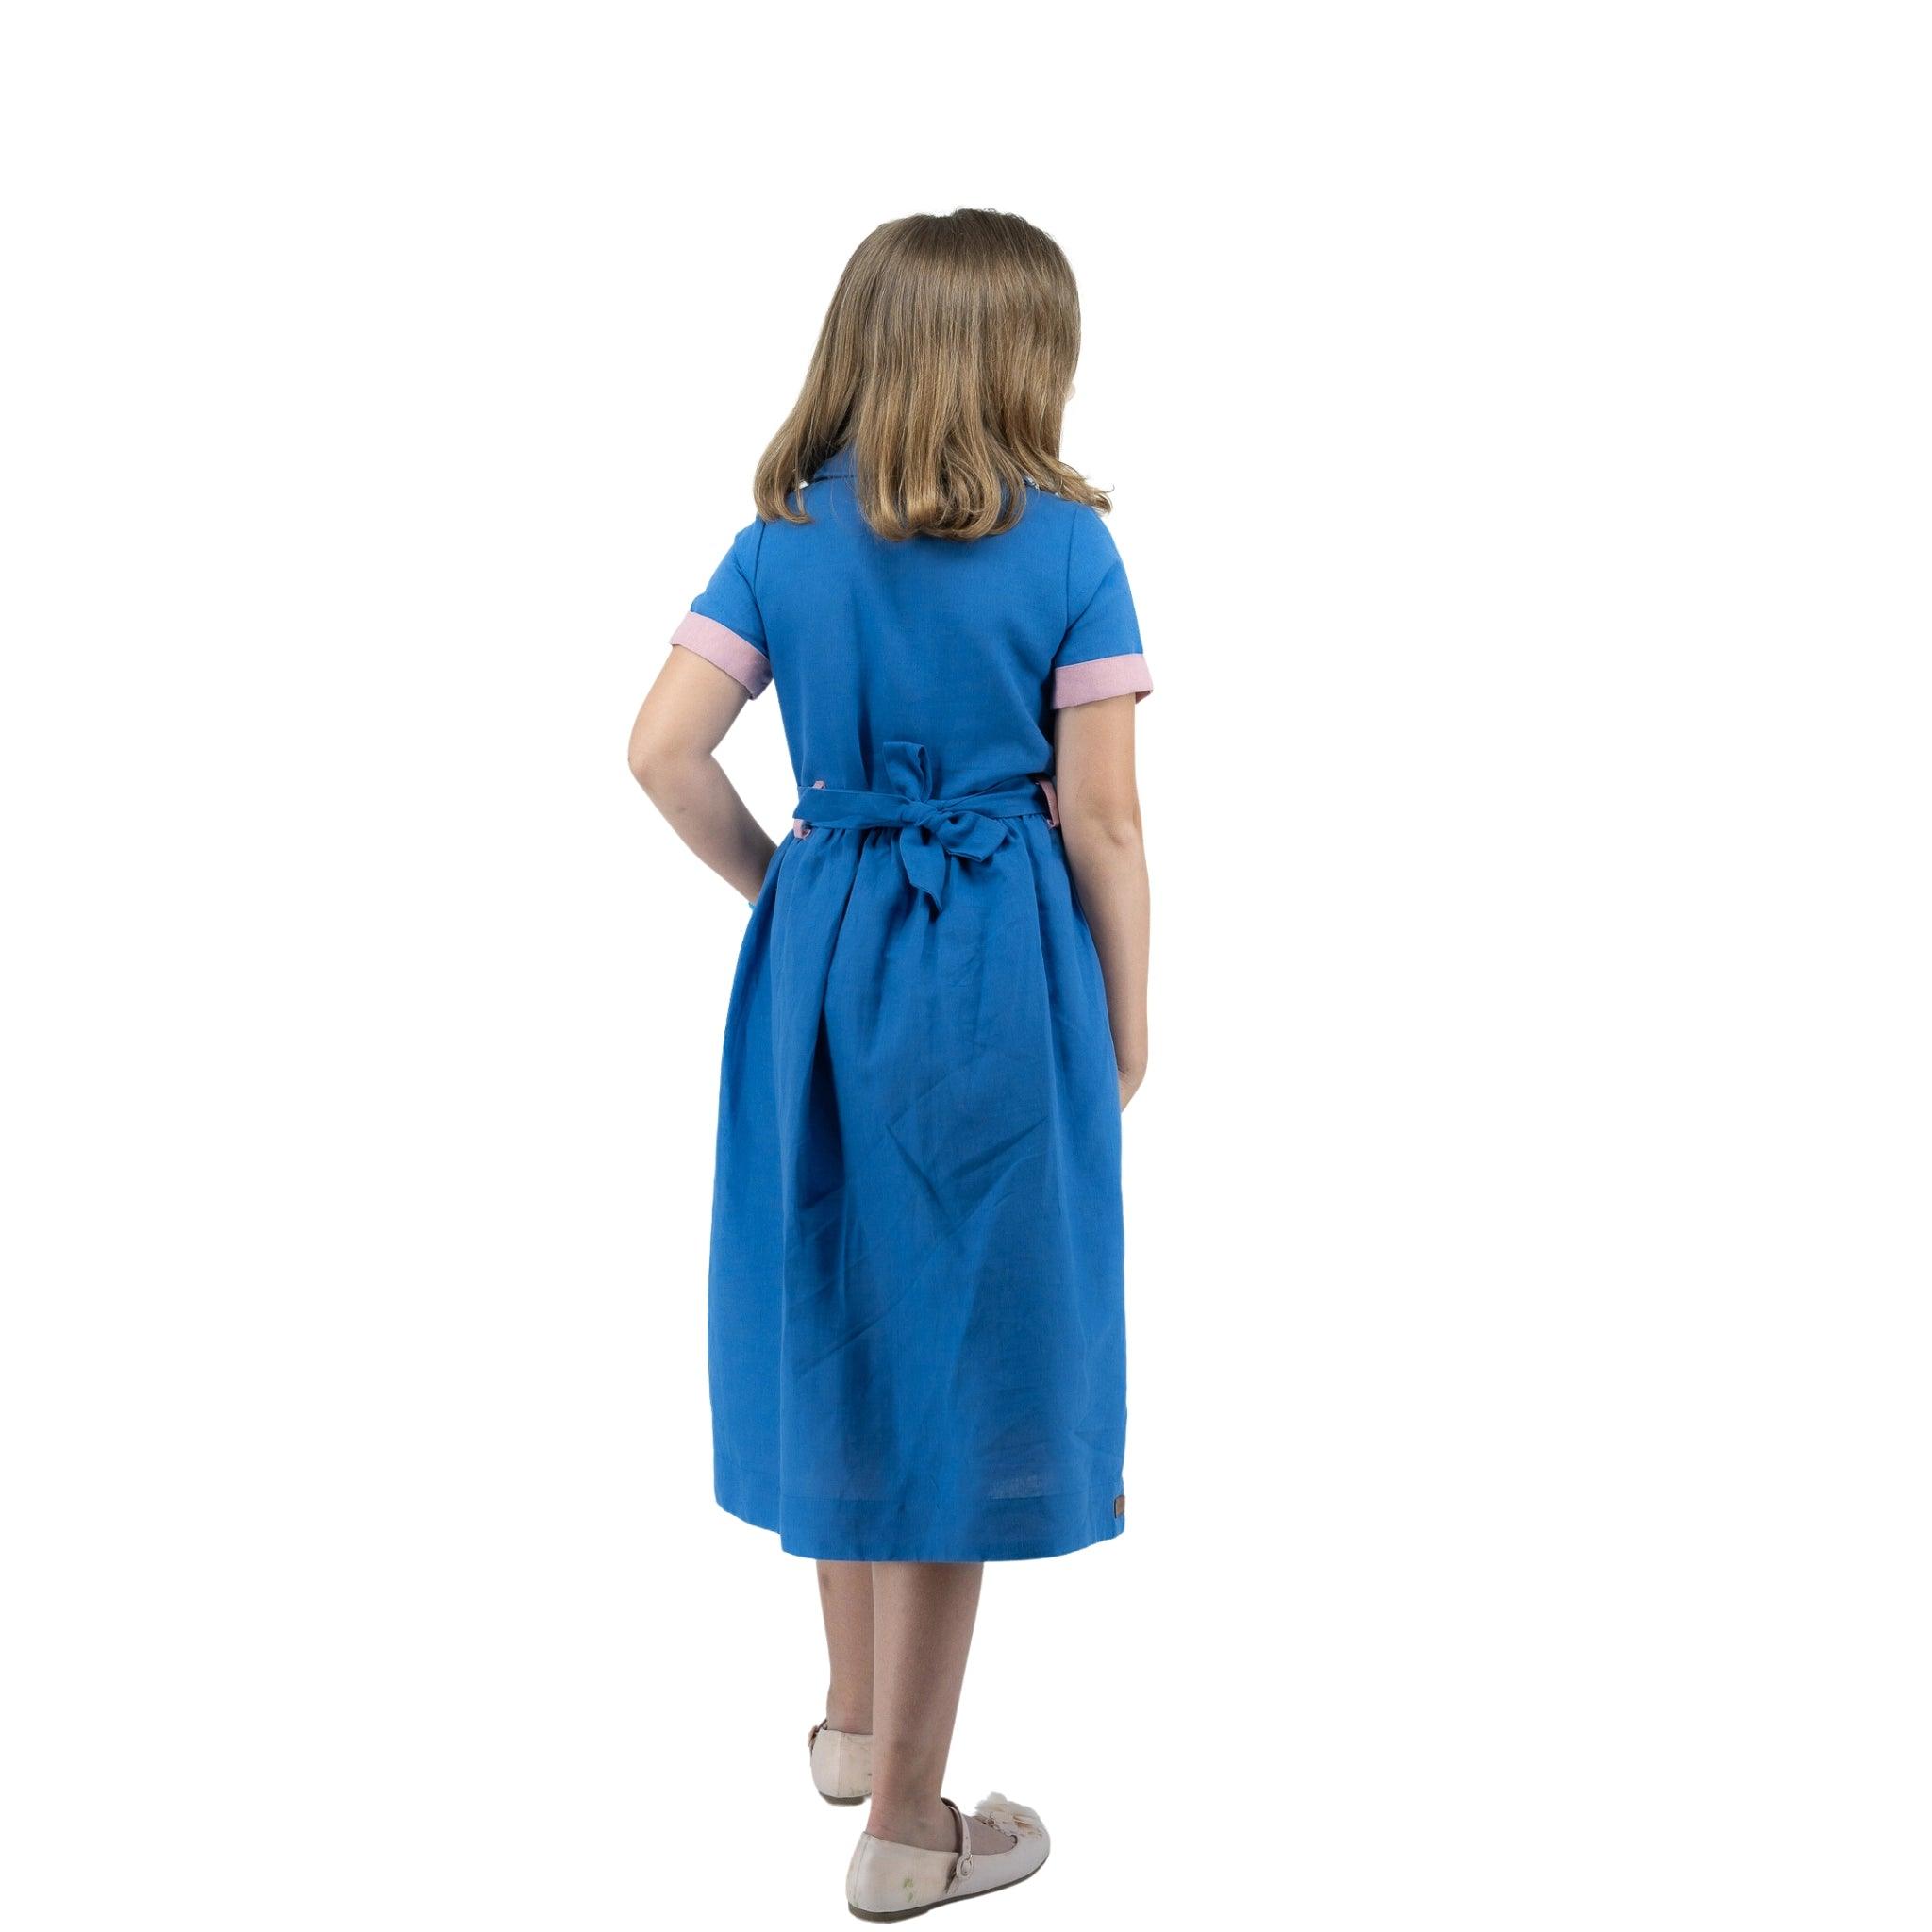 Girl in Karee Parisian Blue Linen Dress for Girls with bow tied at the back, standing facing away from the camera, isolated on white background.